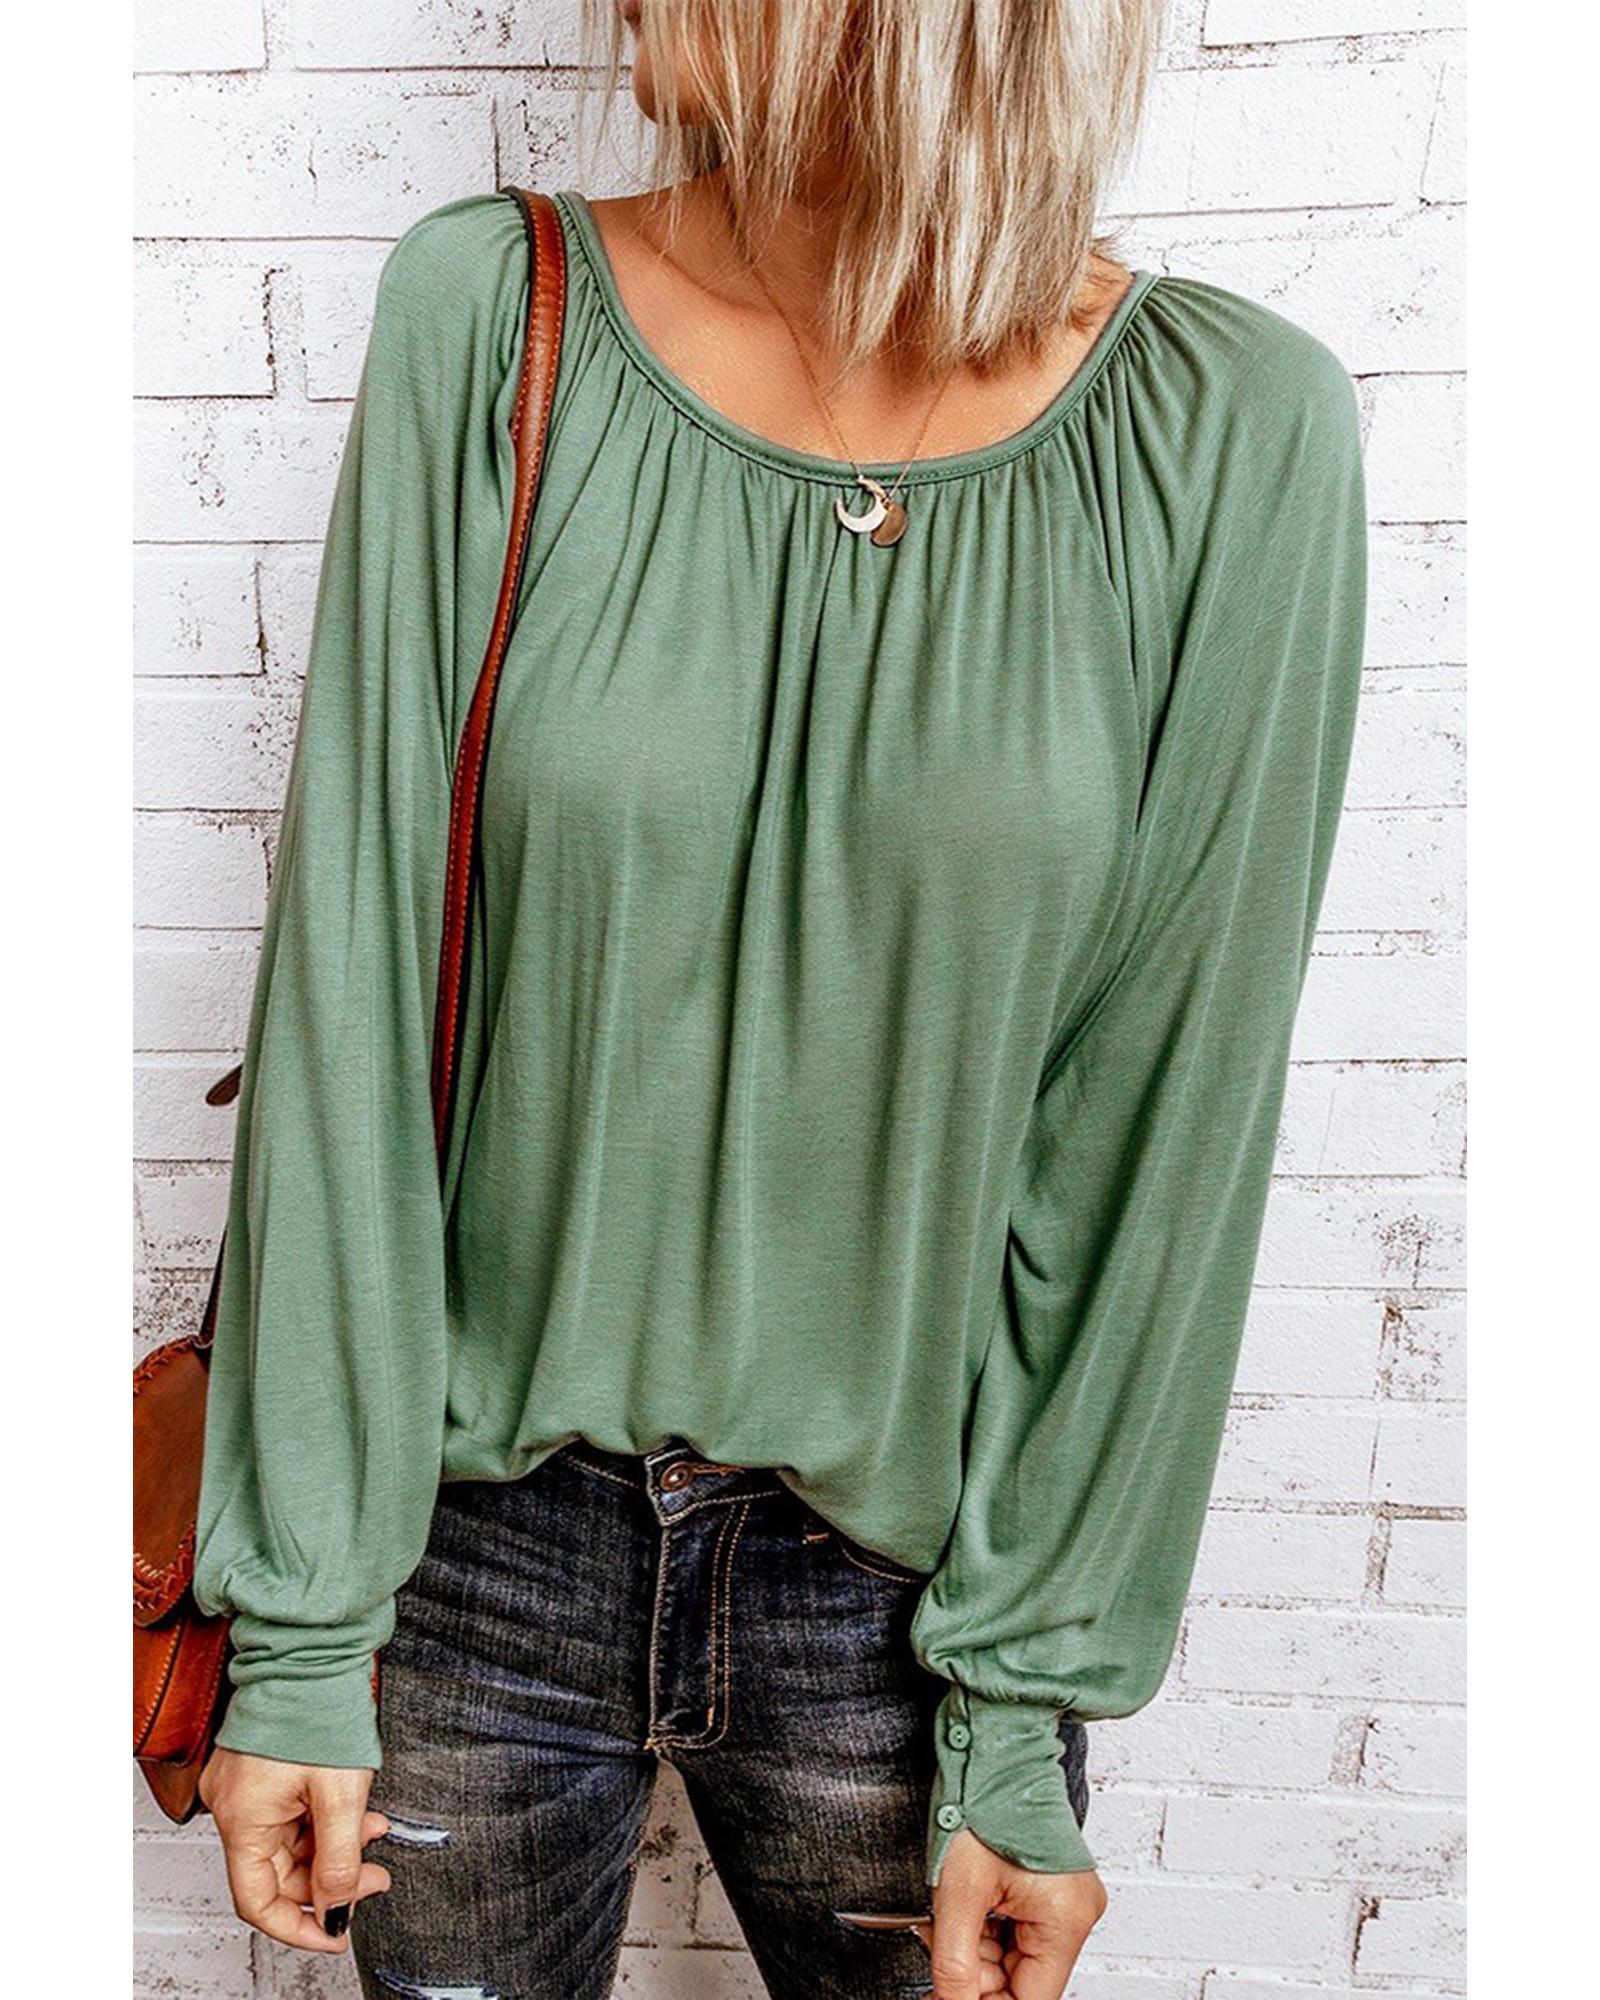 Gathered Bubble Sleeve Top - S